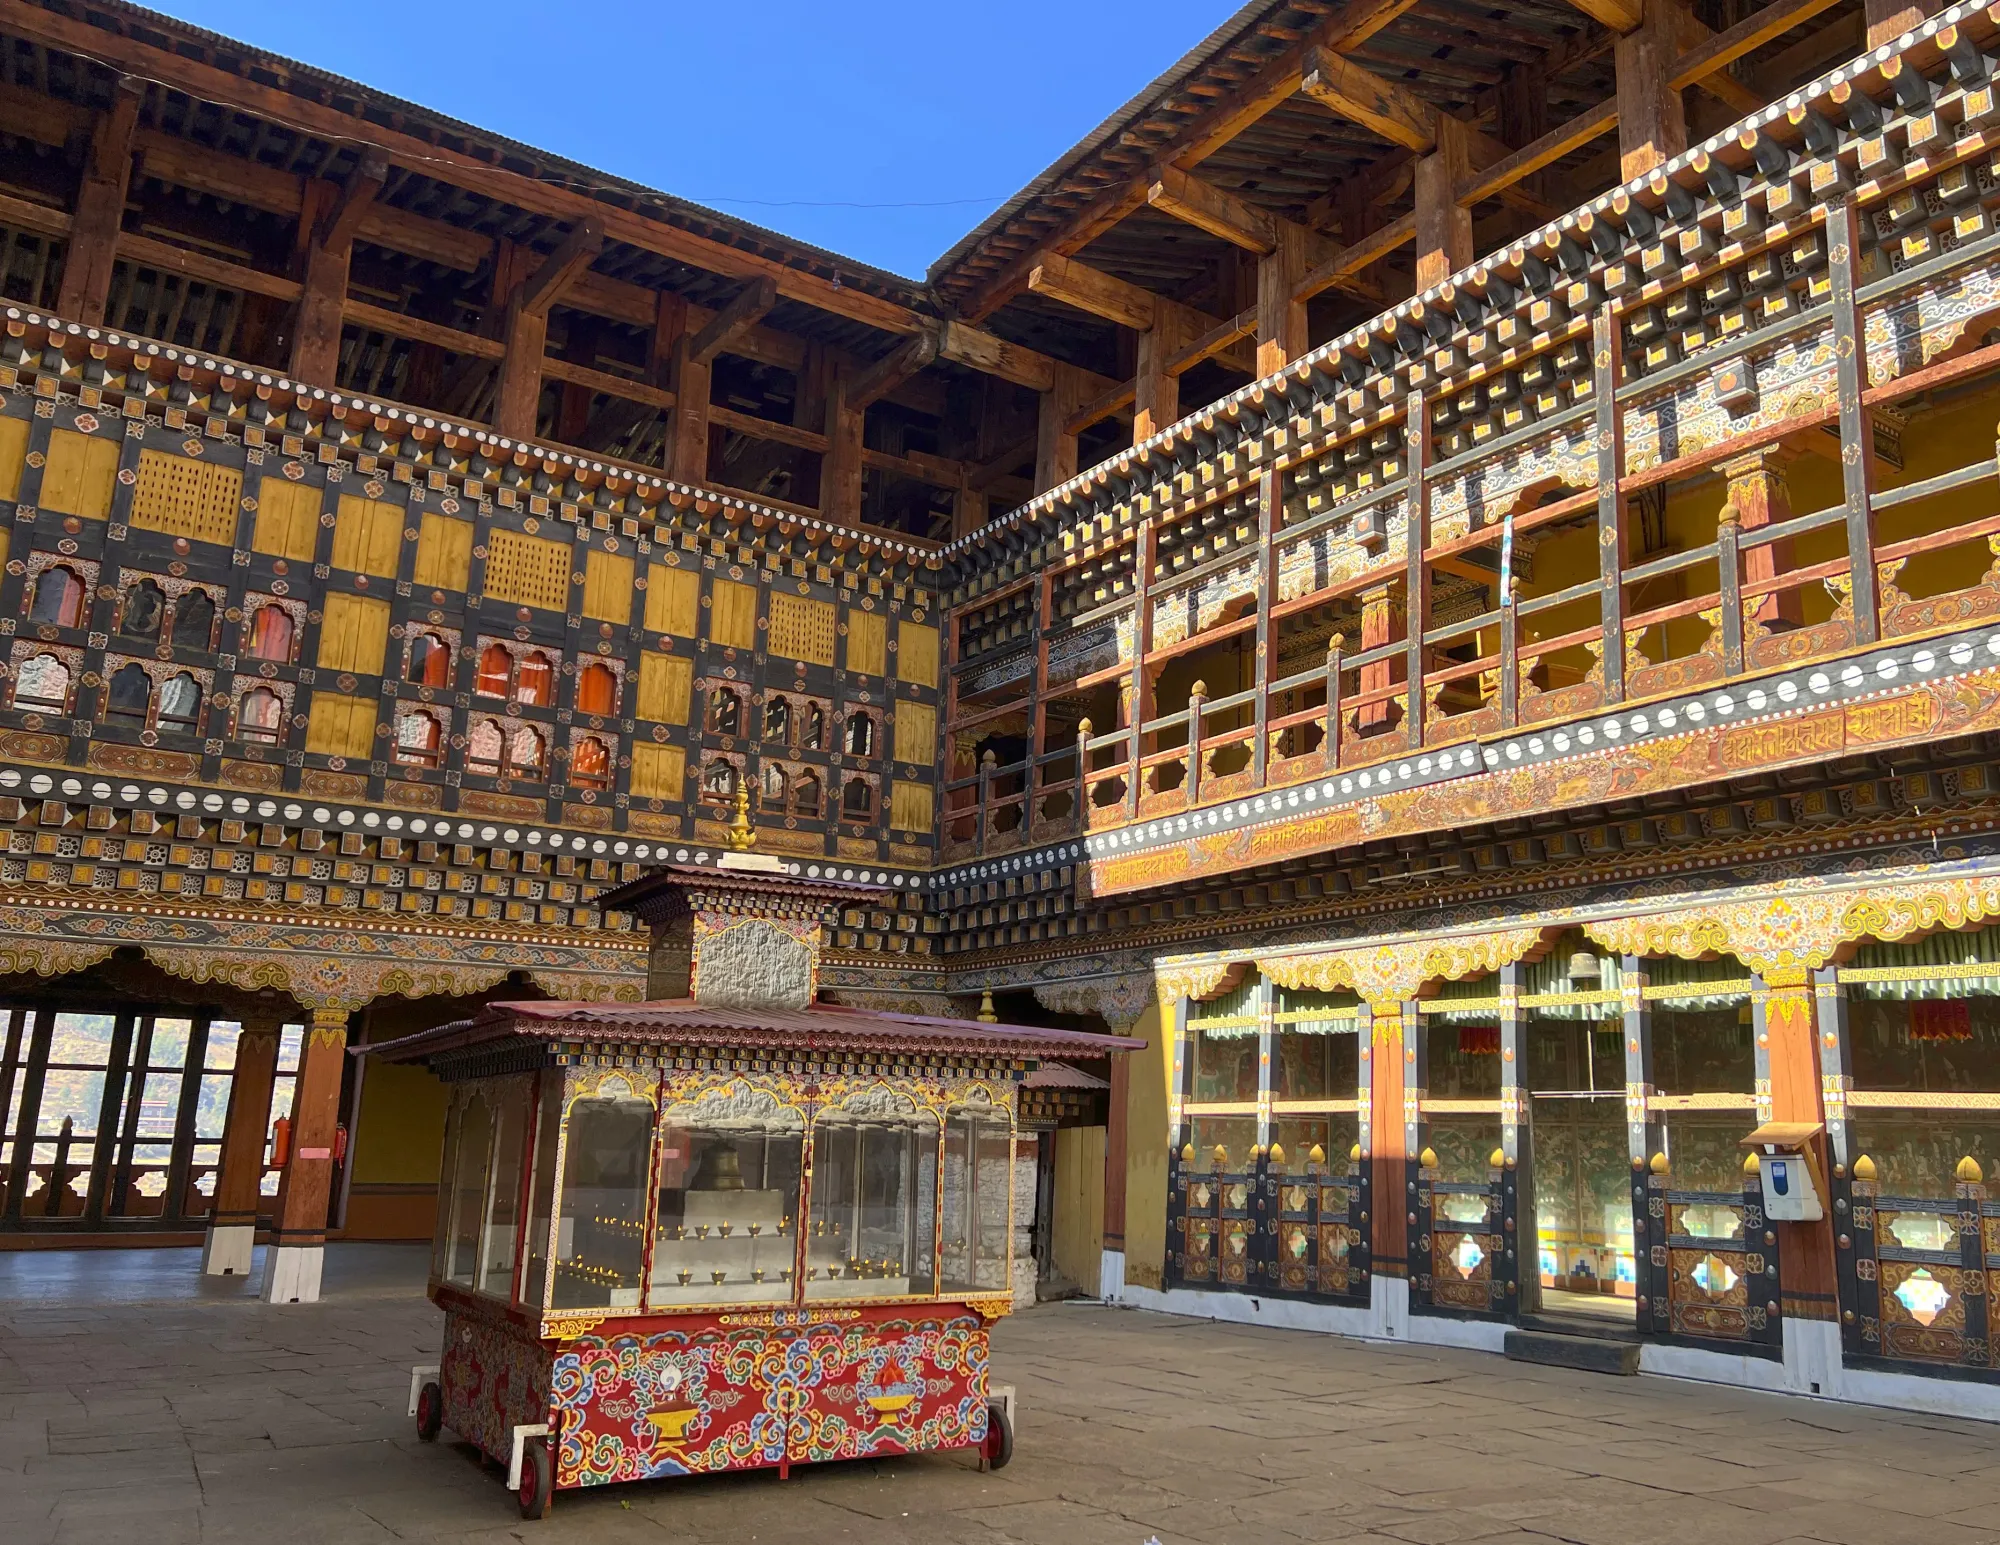 Wooden fort building painted in a multitude of colors